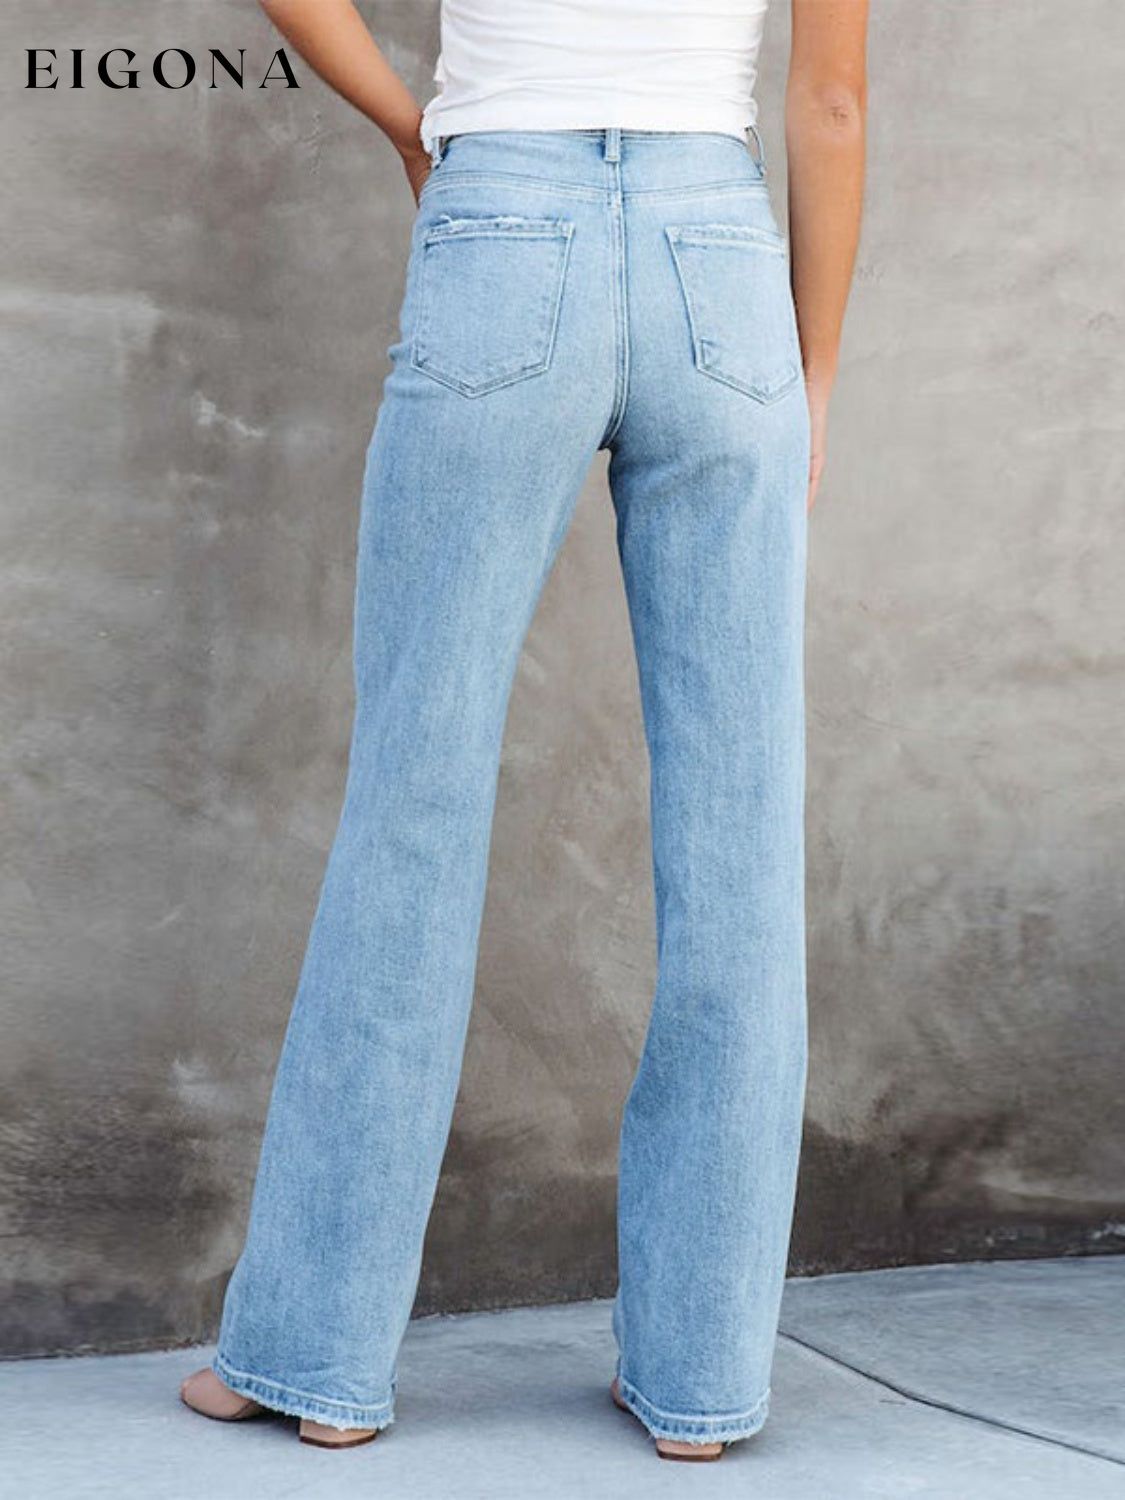 Washed Straight Leg Jeans bottoms clothes denim Jeans pants Ship From Overseas Shipping Delay 09/29/2023 - 10/02/2023 Women's Bottoms X@Y@K